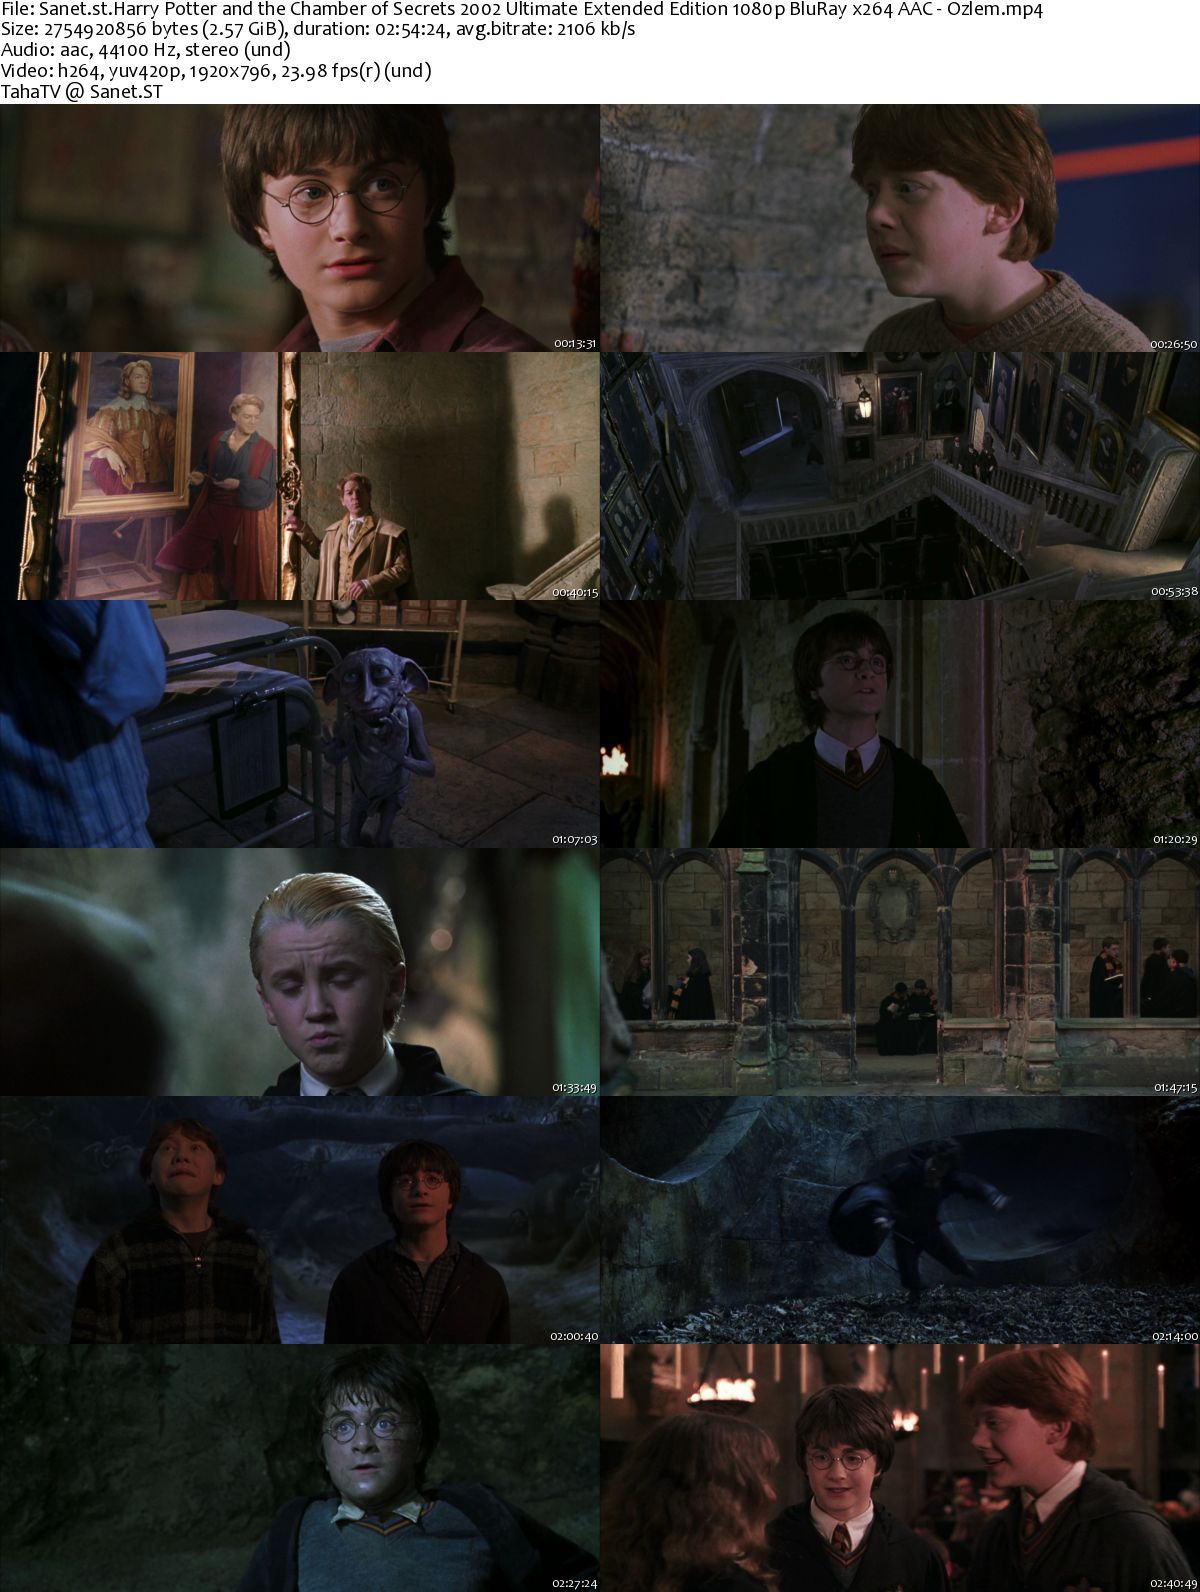 Download Harry Potter and the Chamber of Secrets 2002